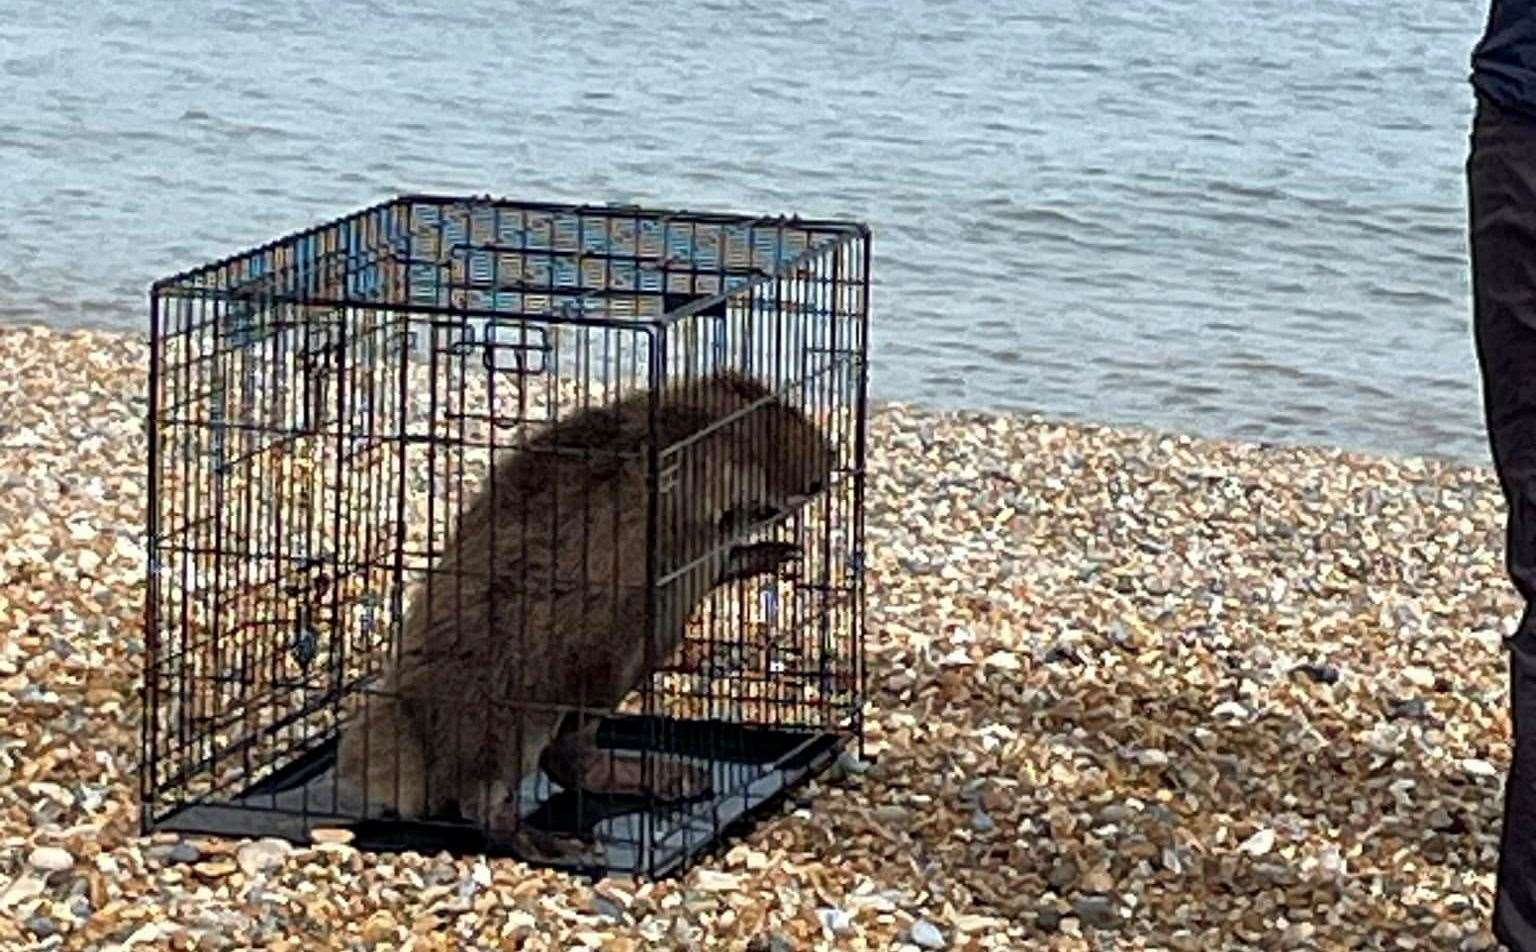 The beaver was rescued and has been taken to Wildwood. Picture: Norma Waller